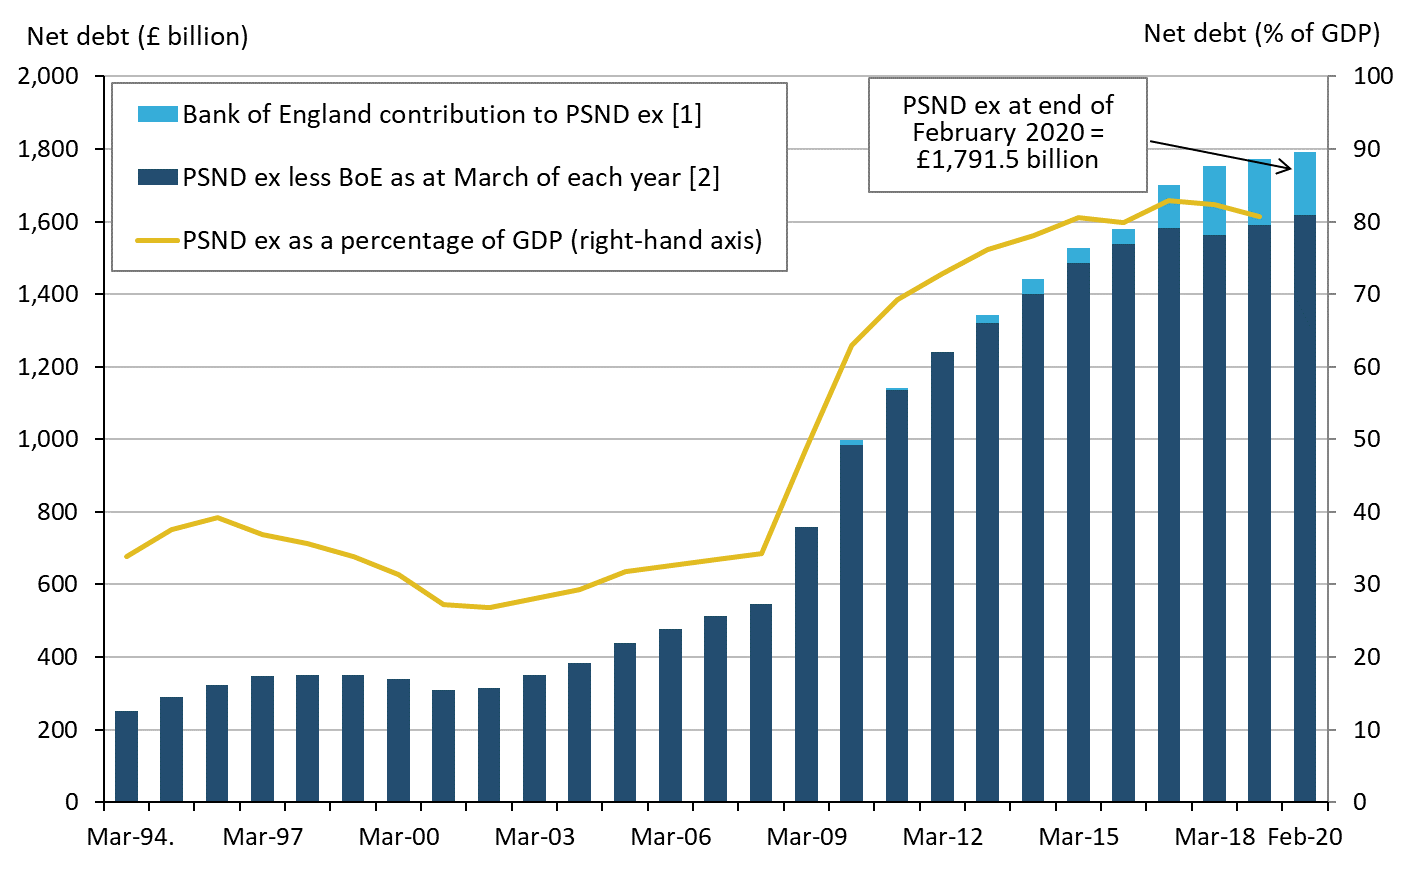 Public sector net debt excluding public sector banks at the end of February 2020 stood at approximately £1.8 trillion (or £1,791.5 billion).